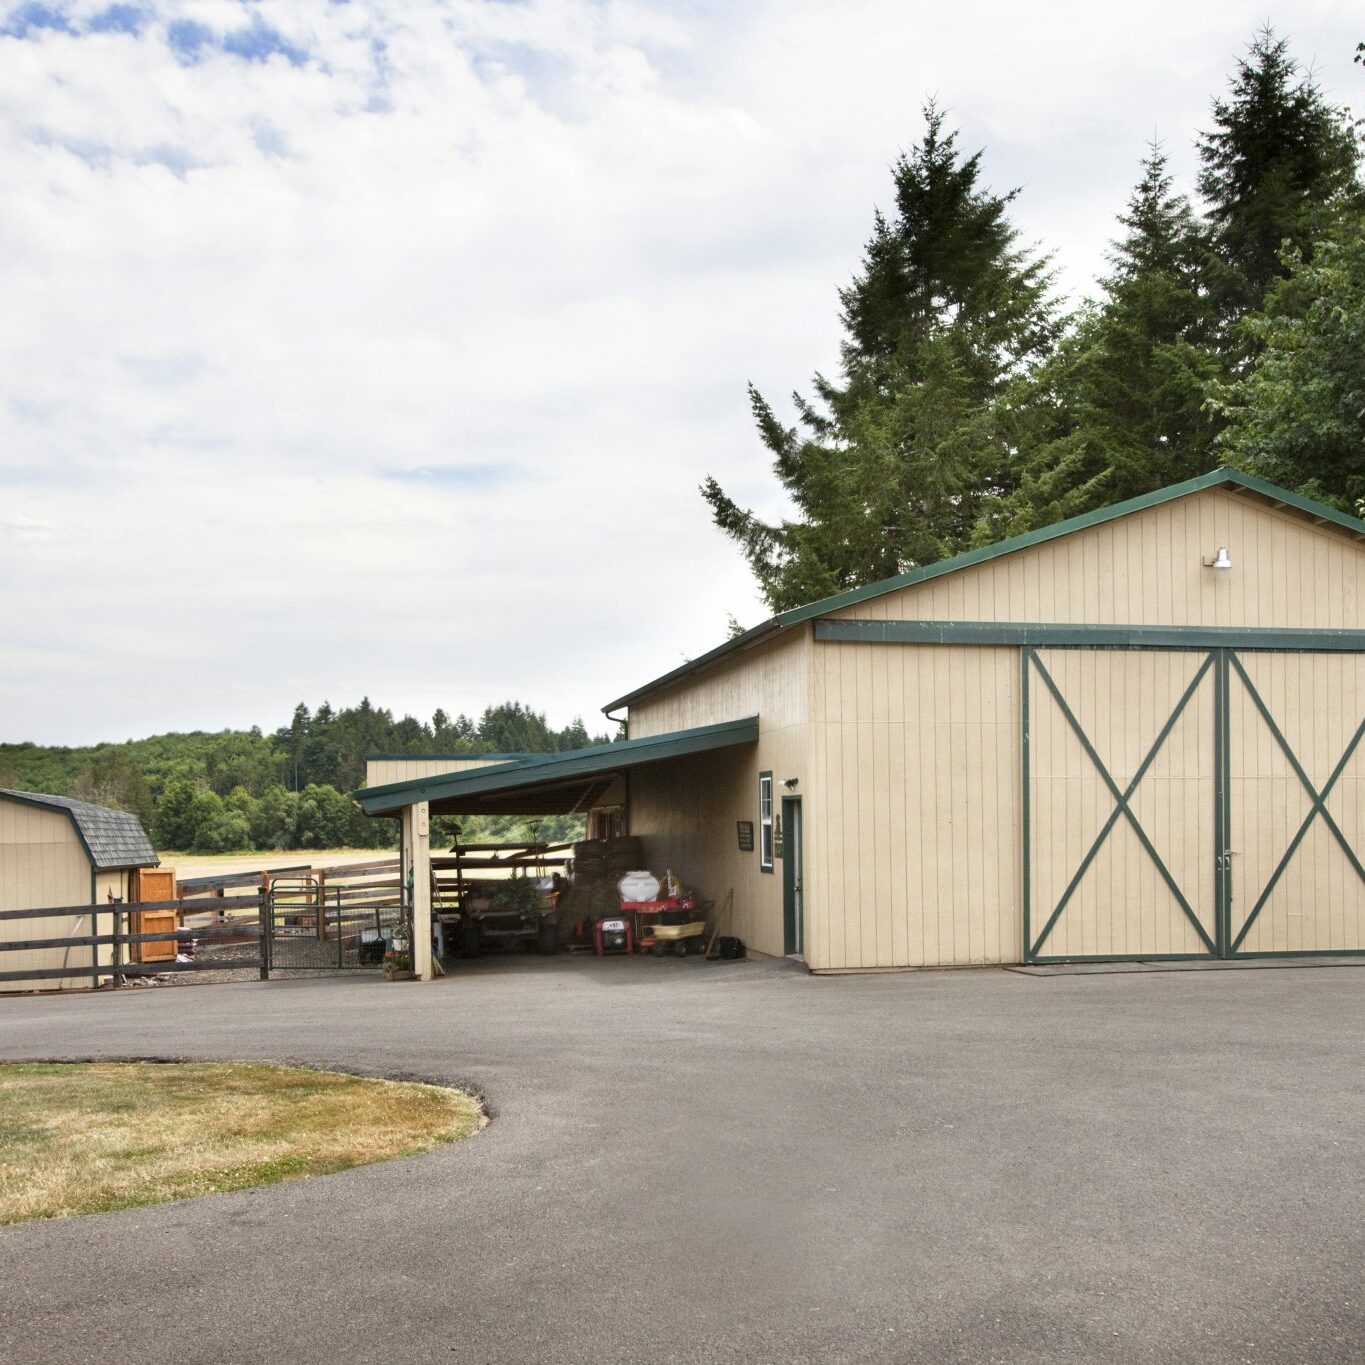 Concrete driveway and barn on ranch